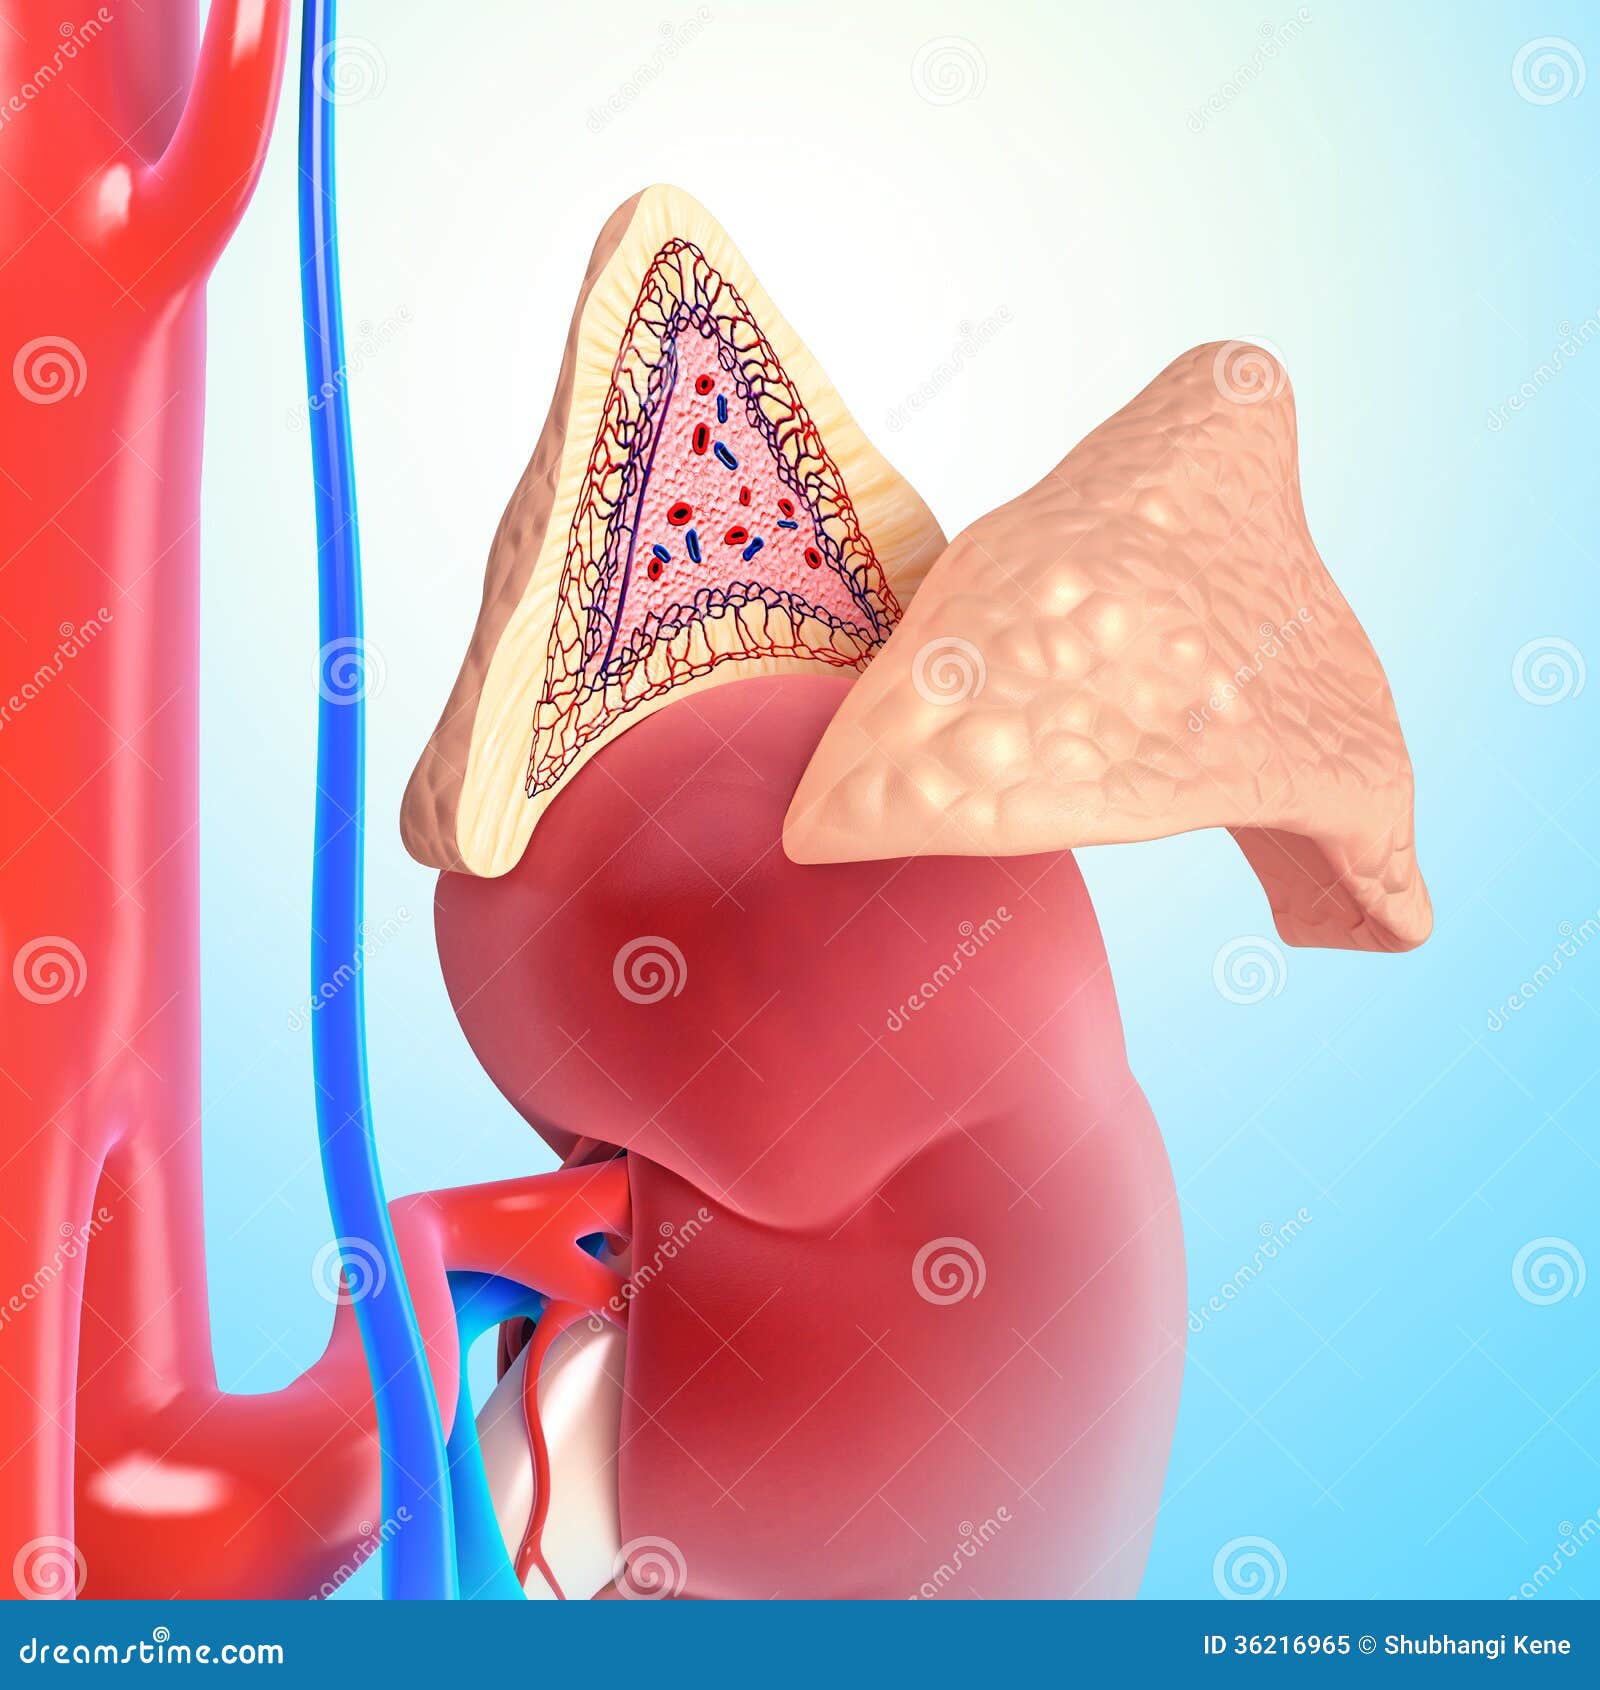 Internal Structure Of Adrenal Gland Royalty Free Stock Photo - Image